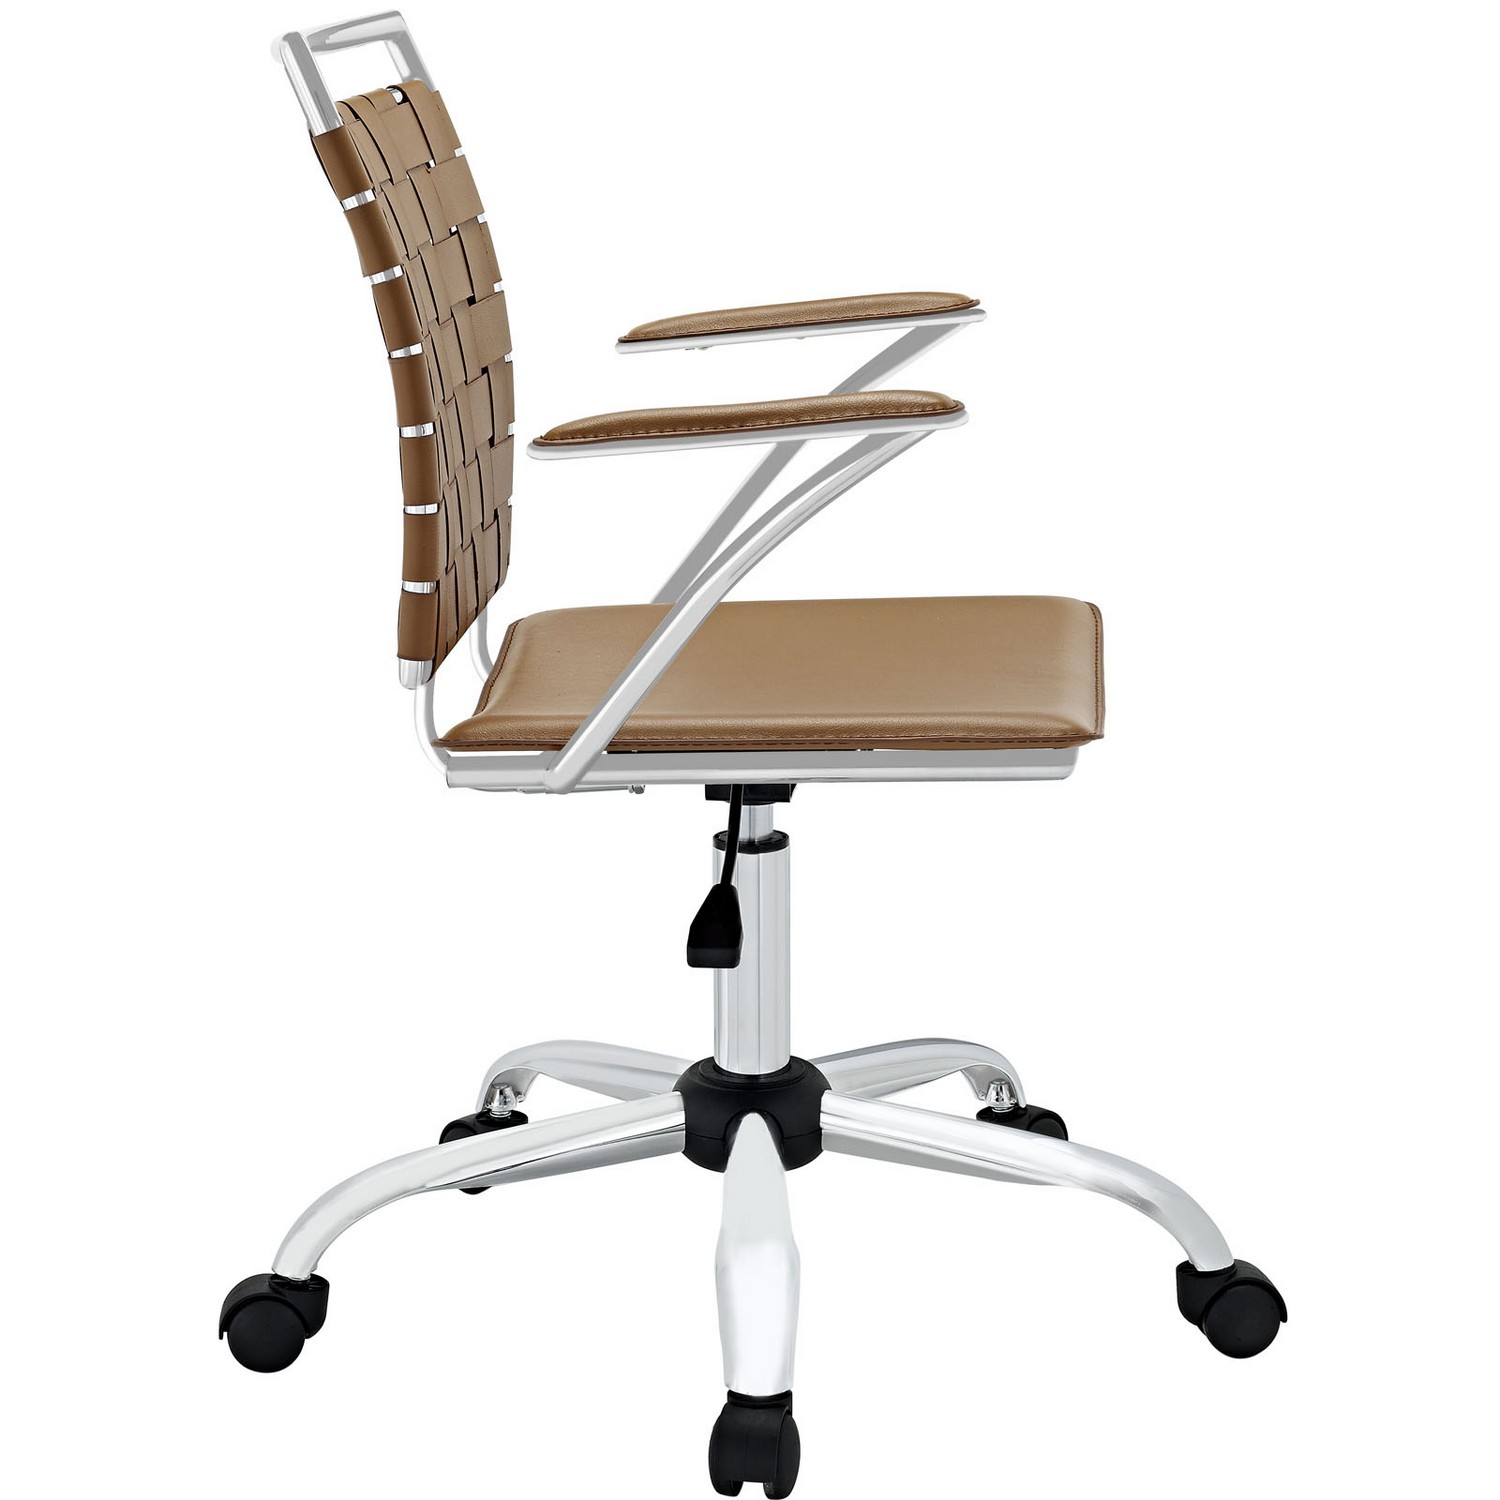 Modway Fuse Office Chair - Tan